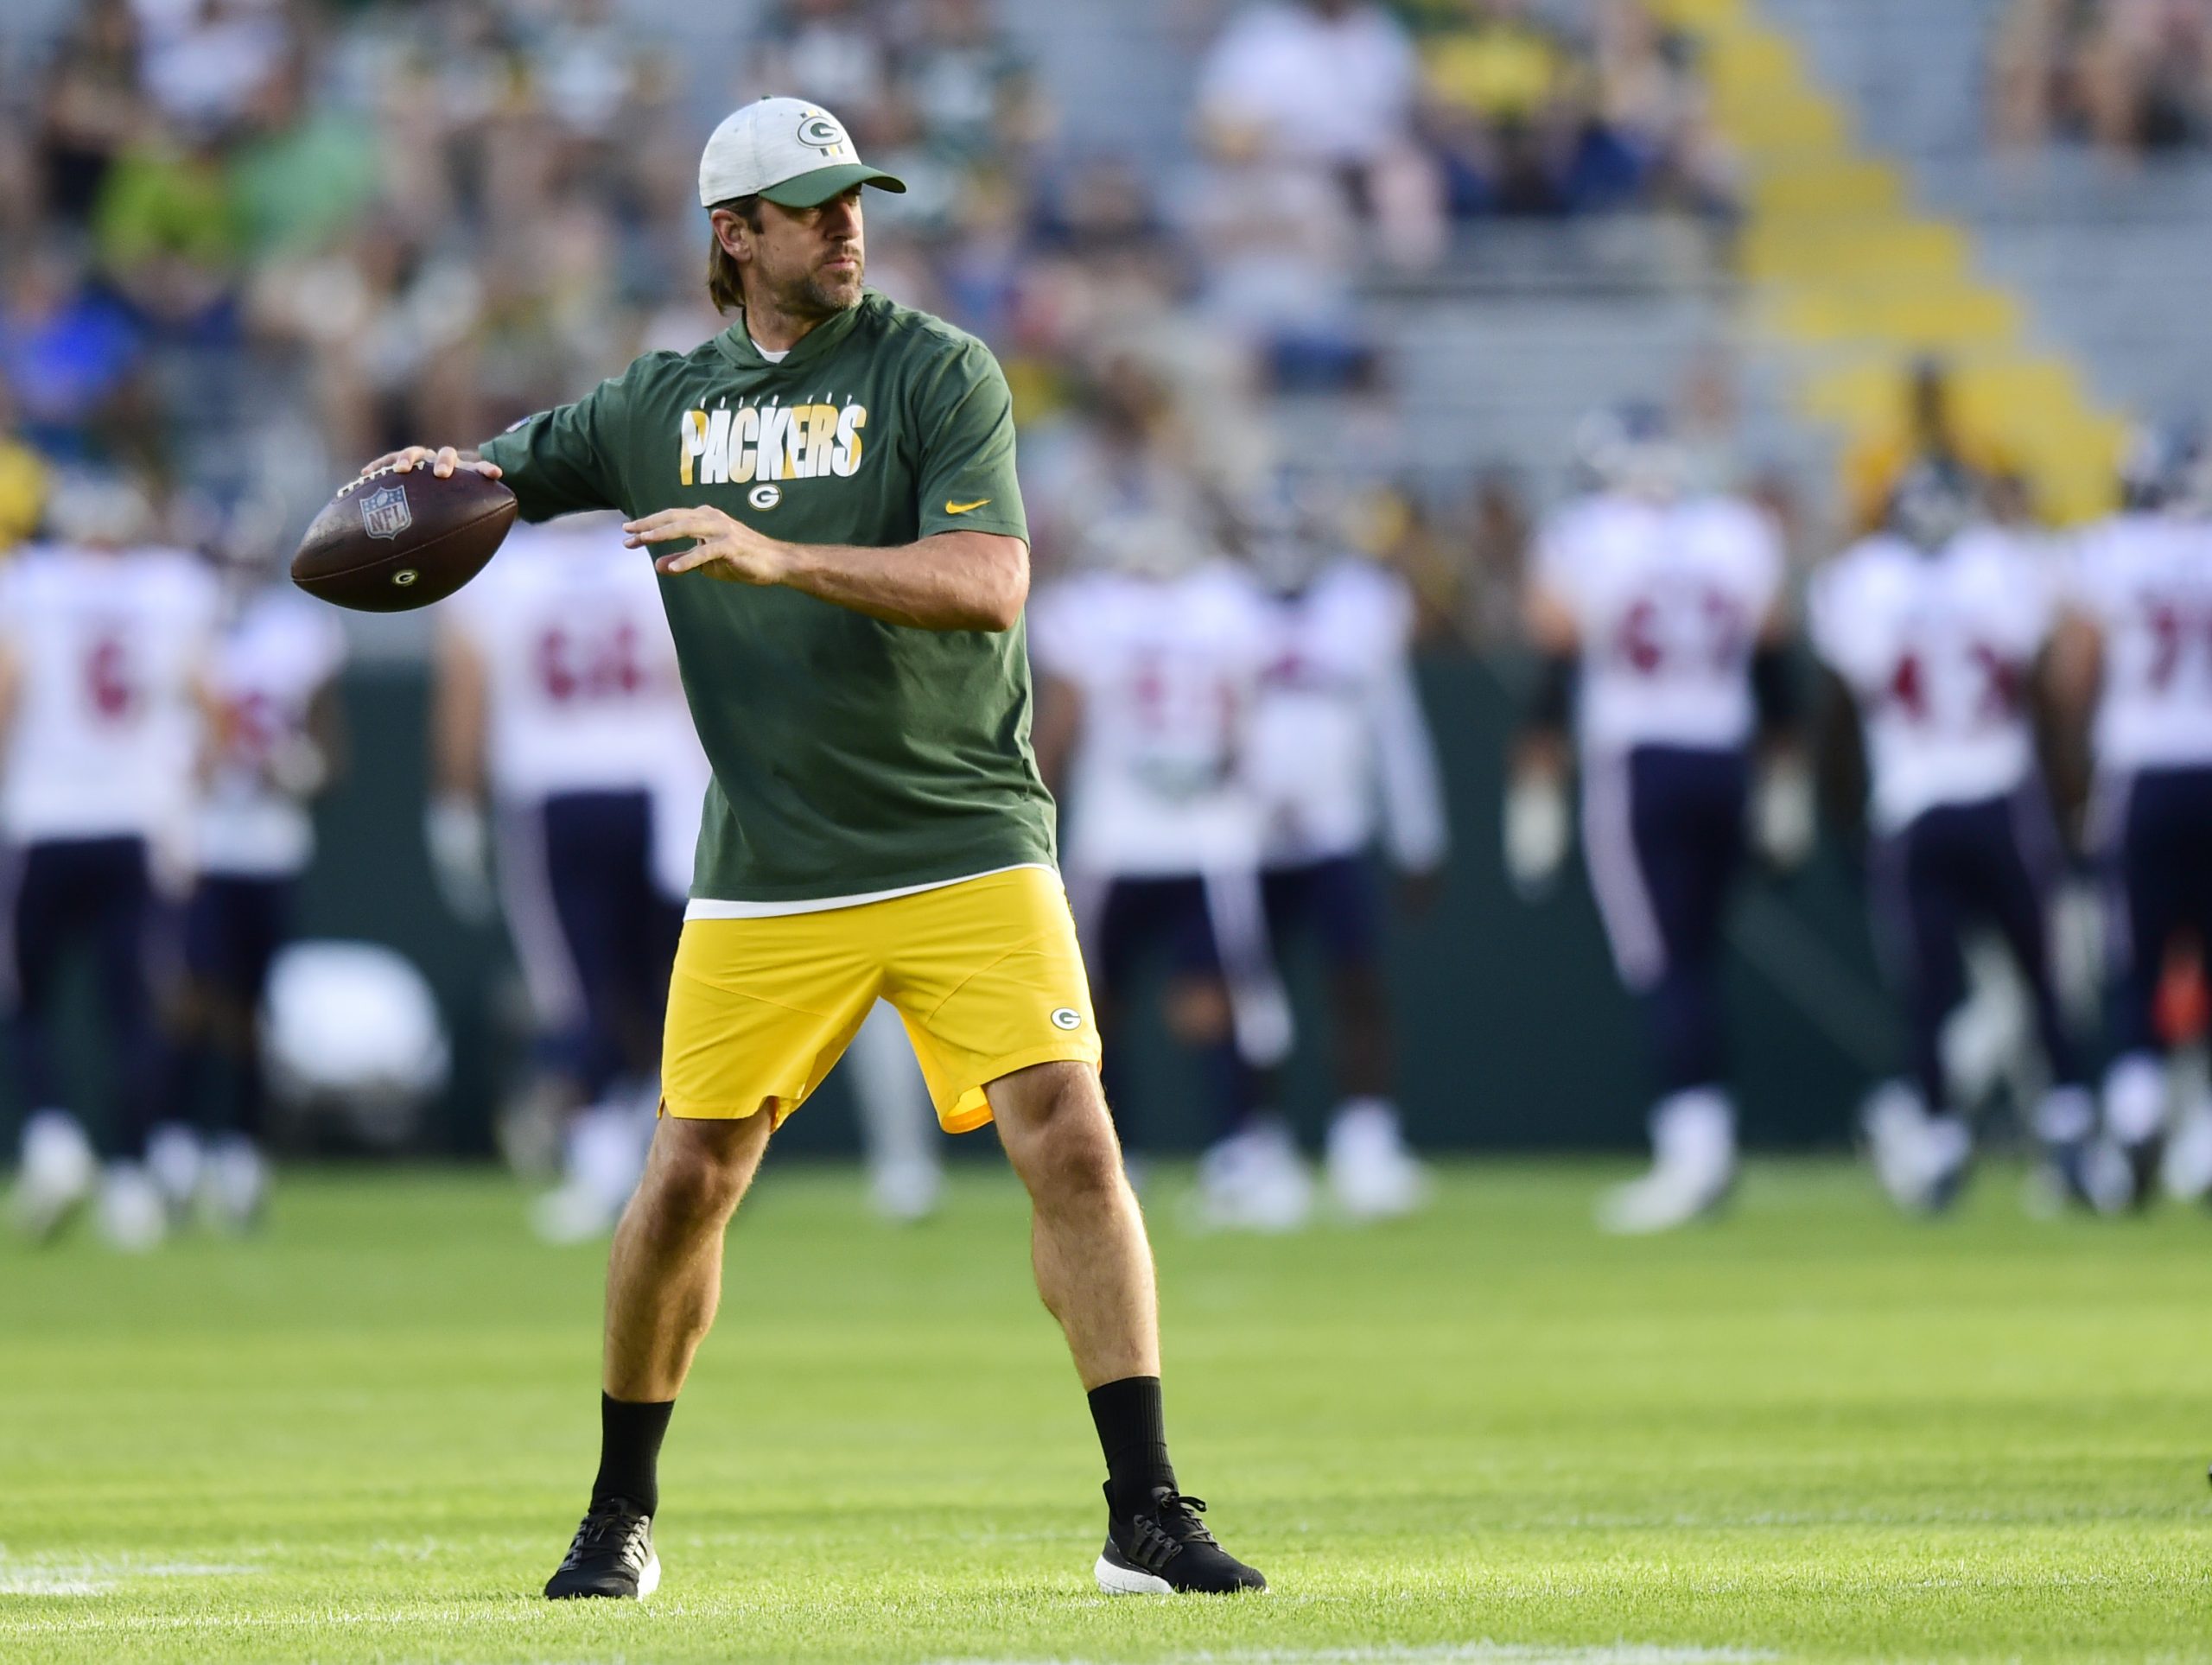 Aaron Rodgers of the Green Bay Packers throws a pass during warmups.